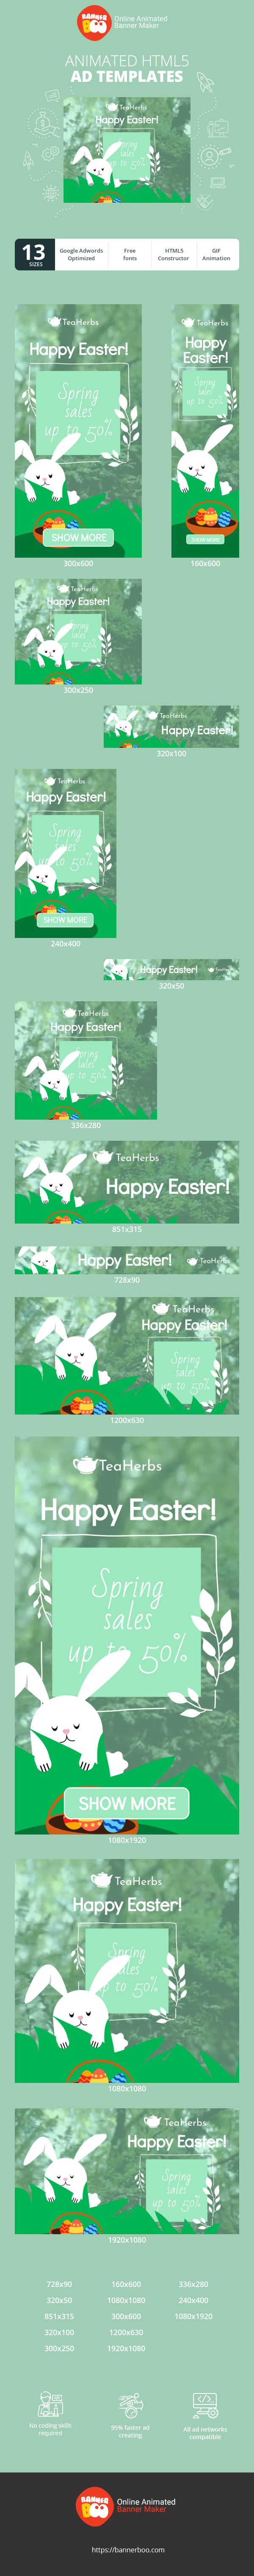 Happy Easter — Spring Sales Up To 50%